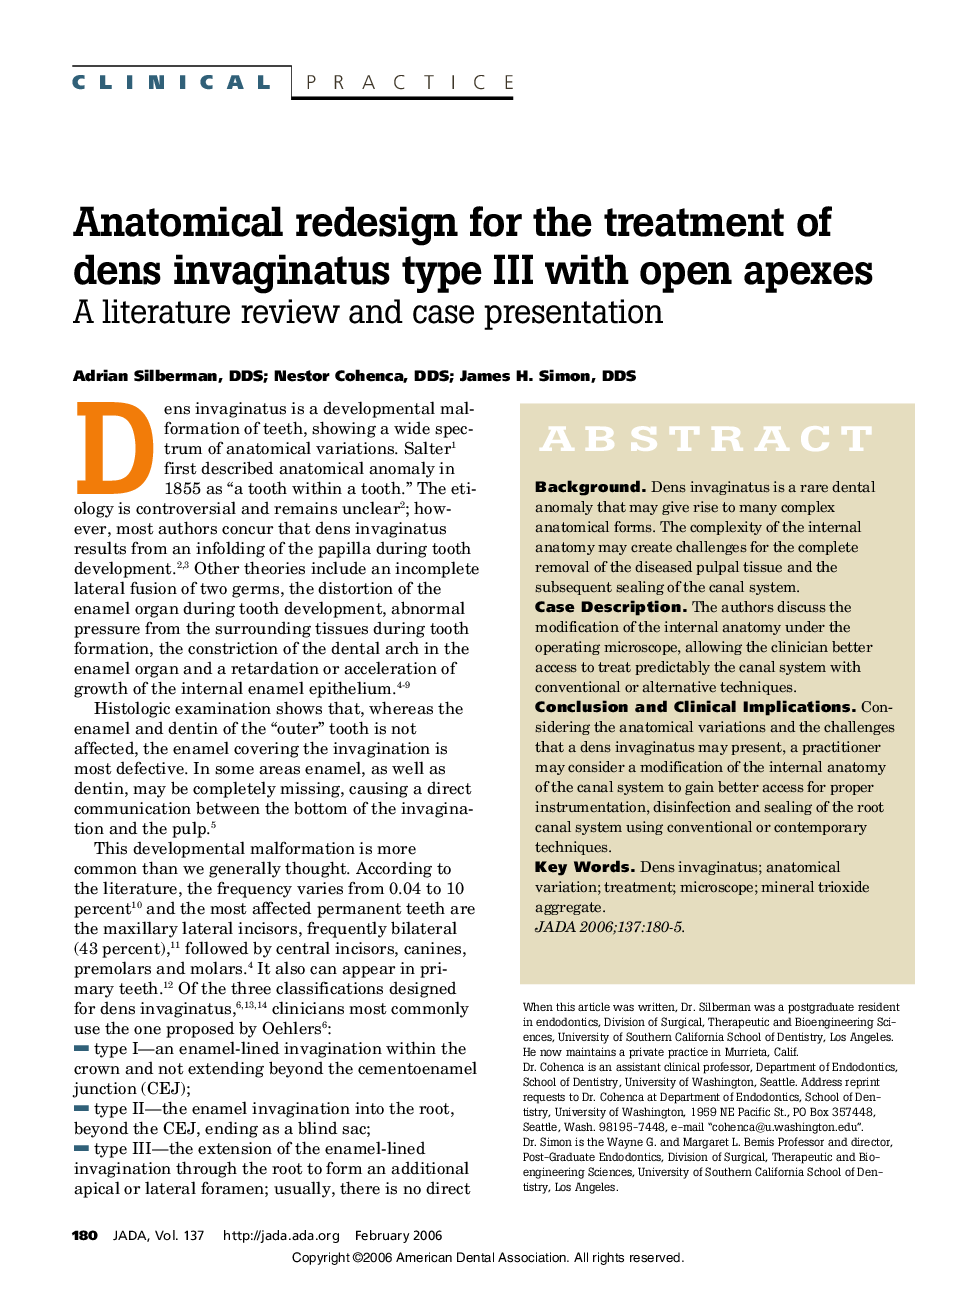 Anatomical redesign for the treatment of dens invaginatus type III with open apexes